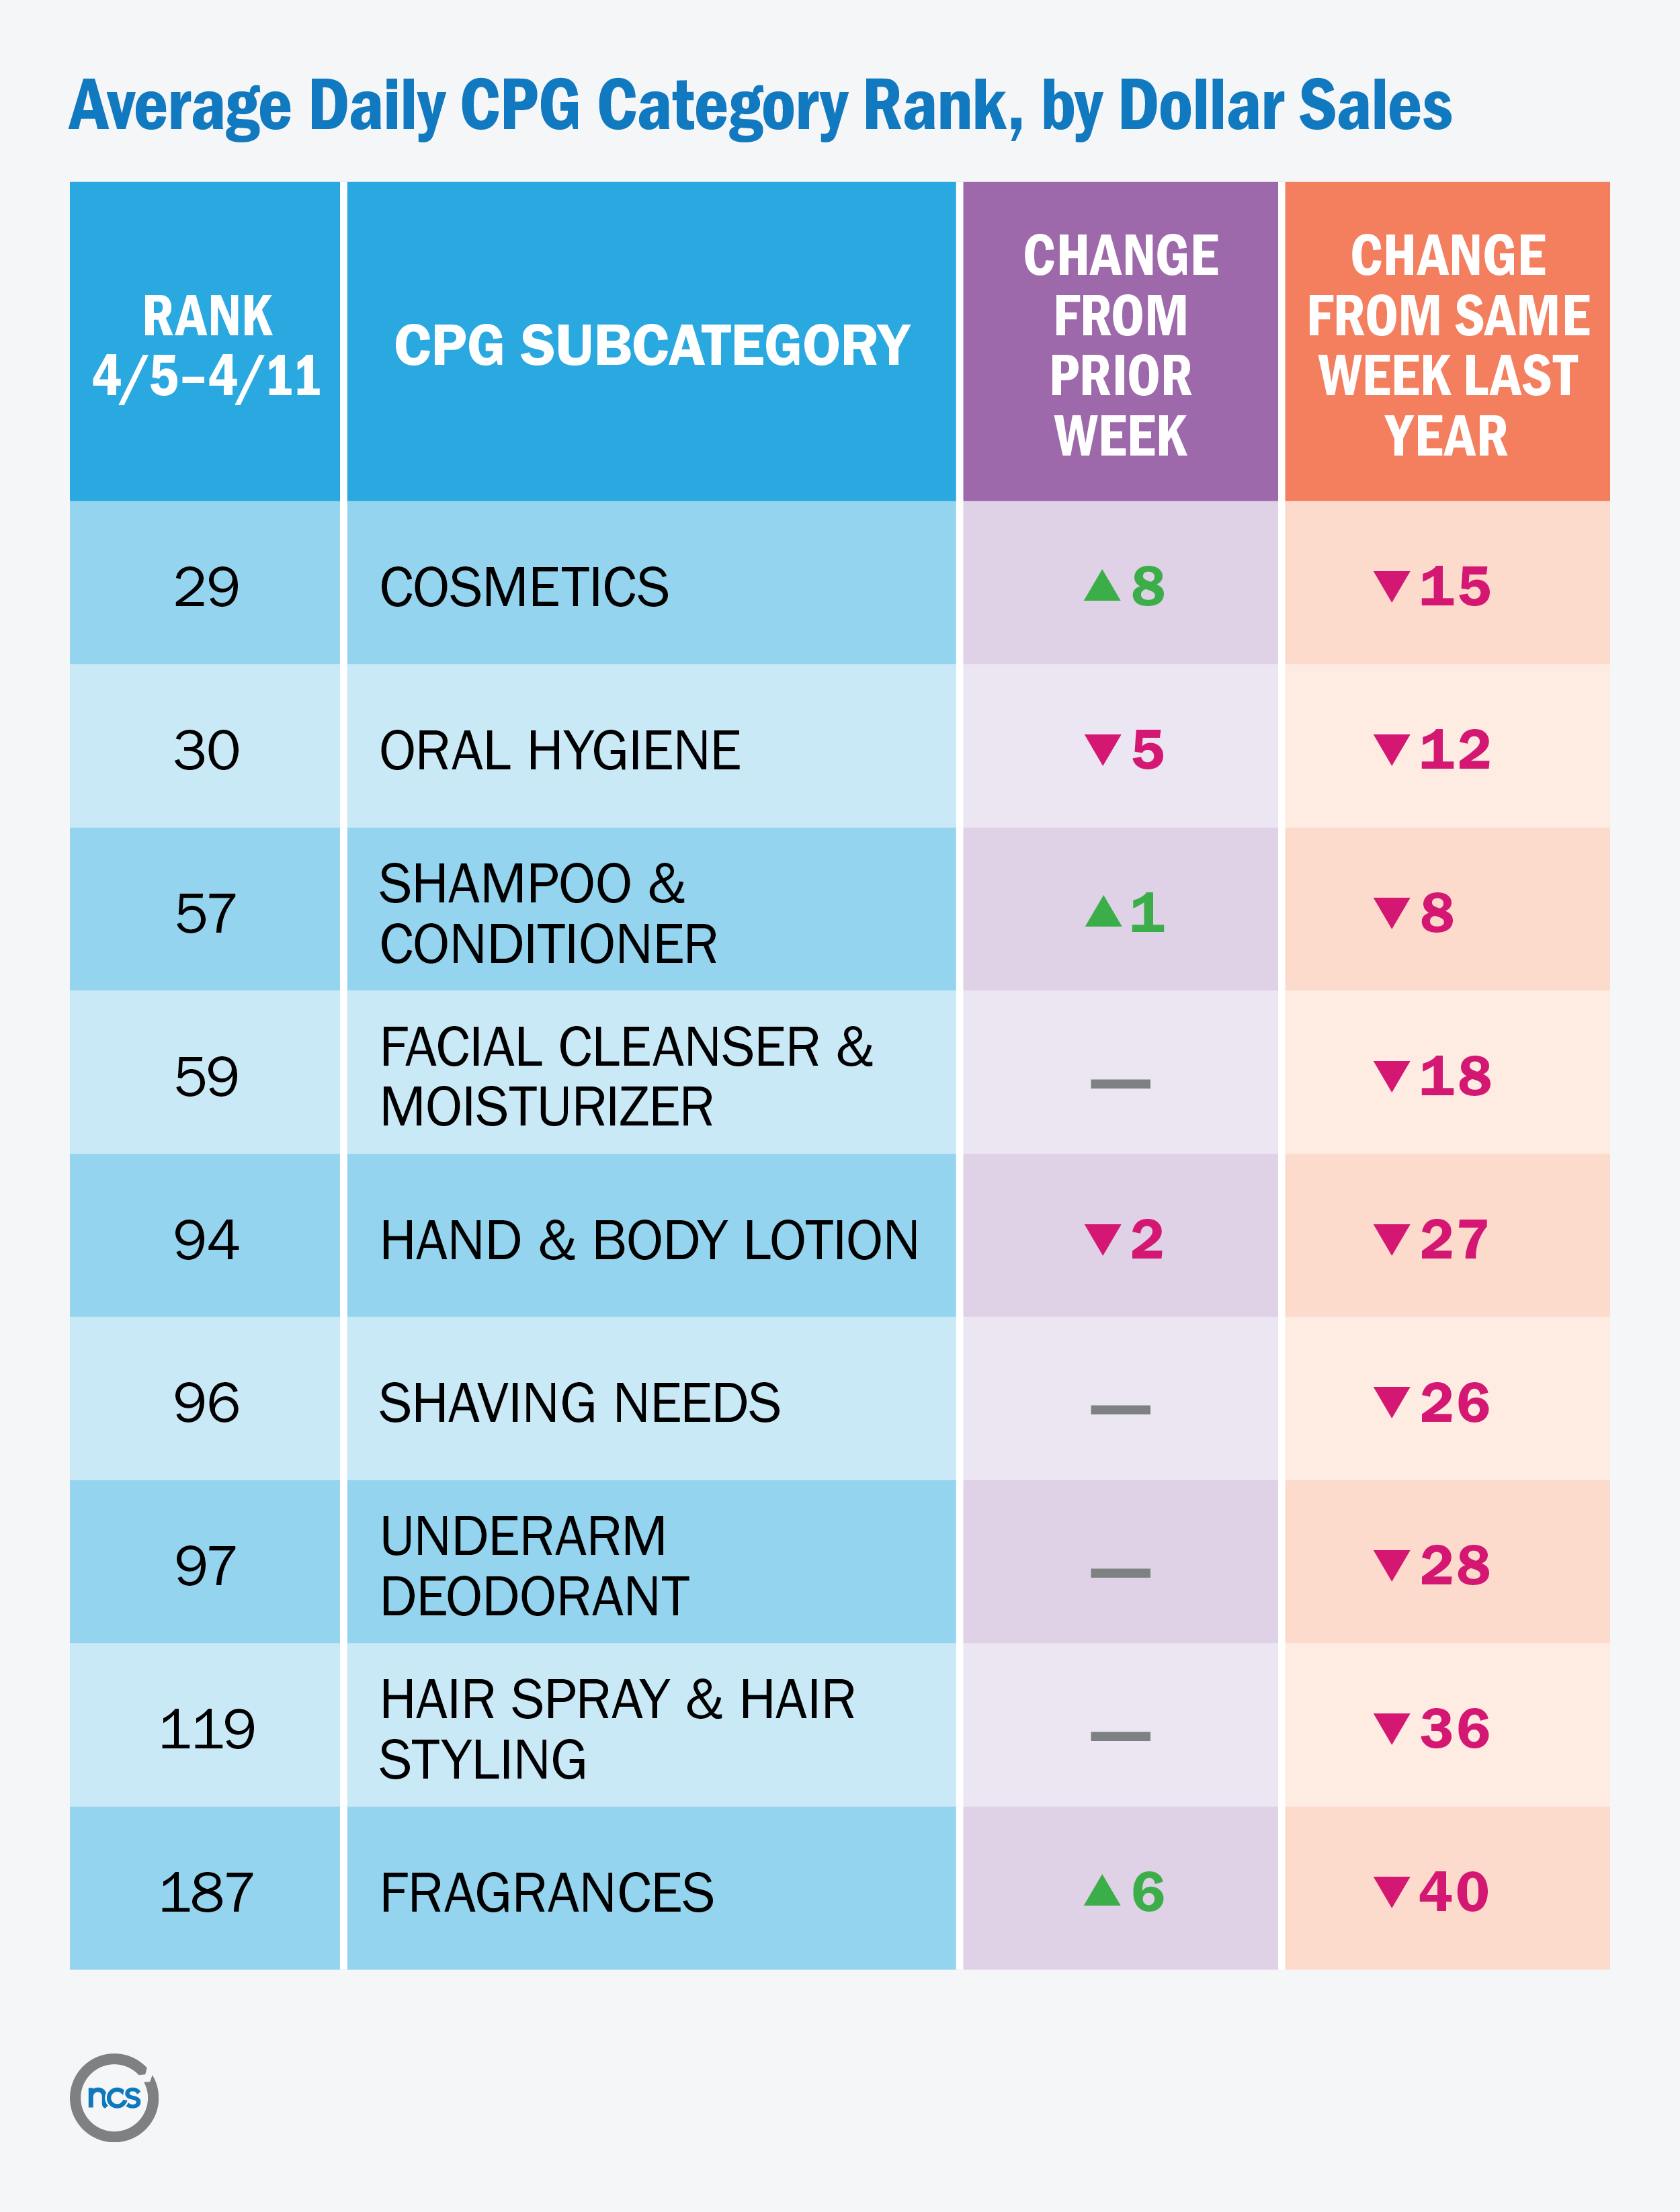 chart showing beauty cpg categories that dropped in rank in April 2020 compared to last year